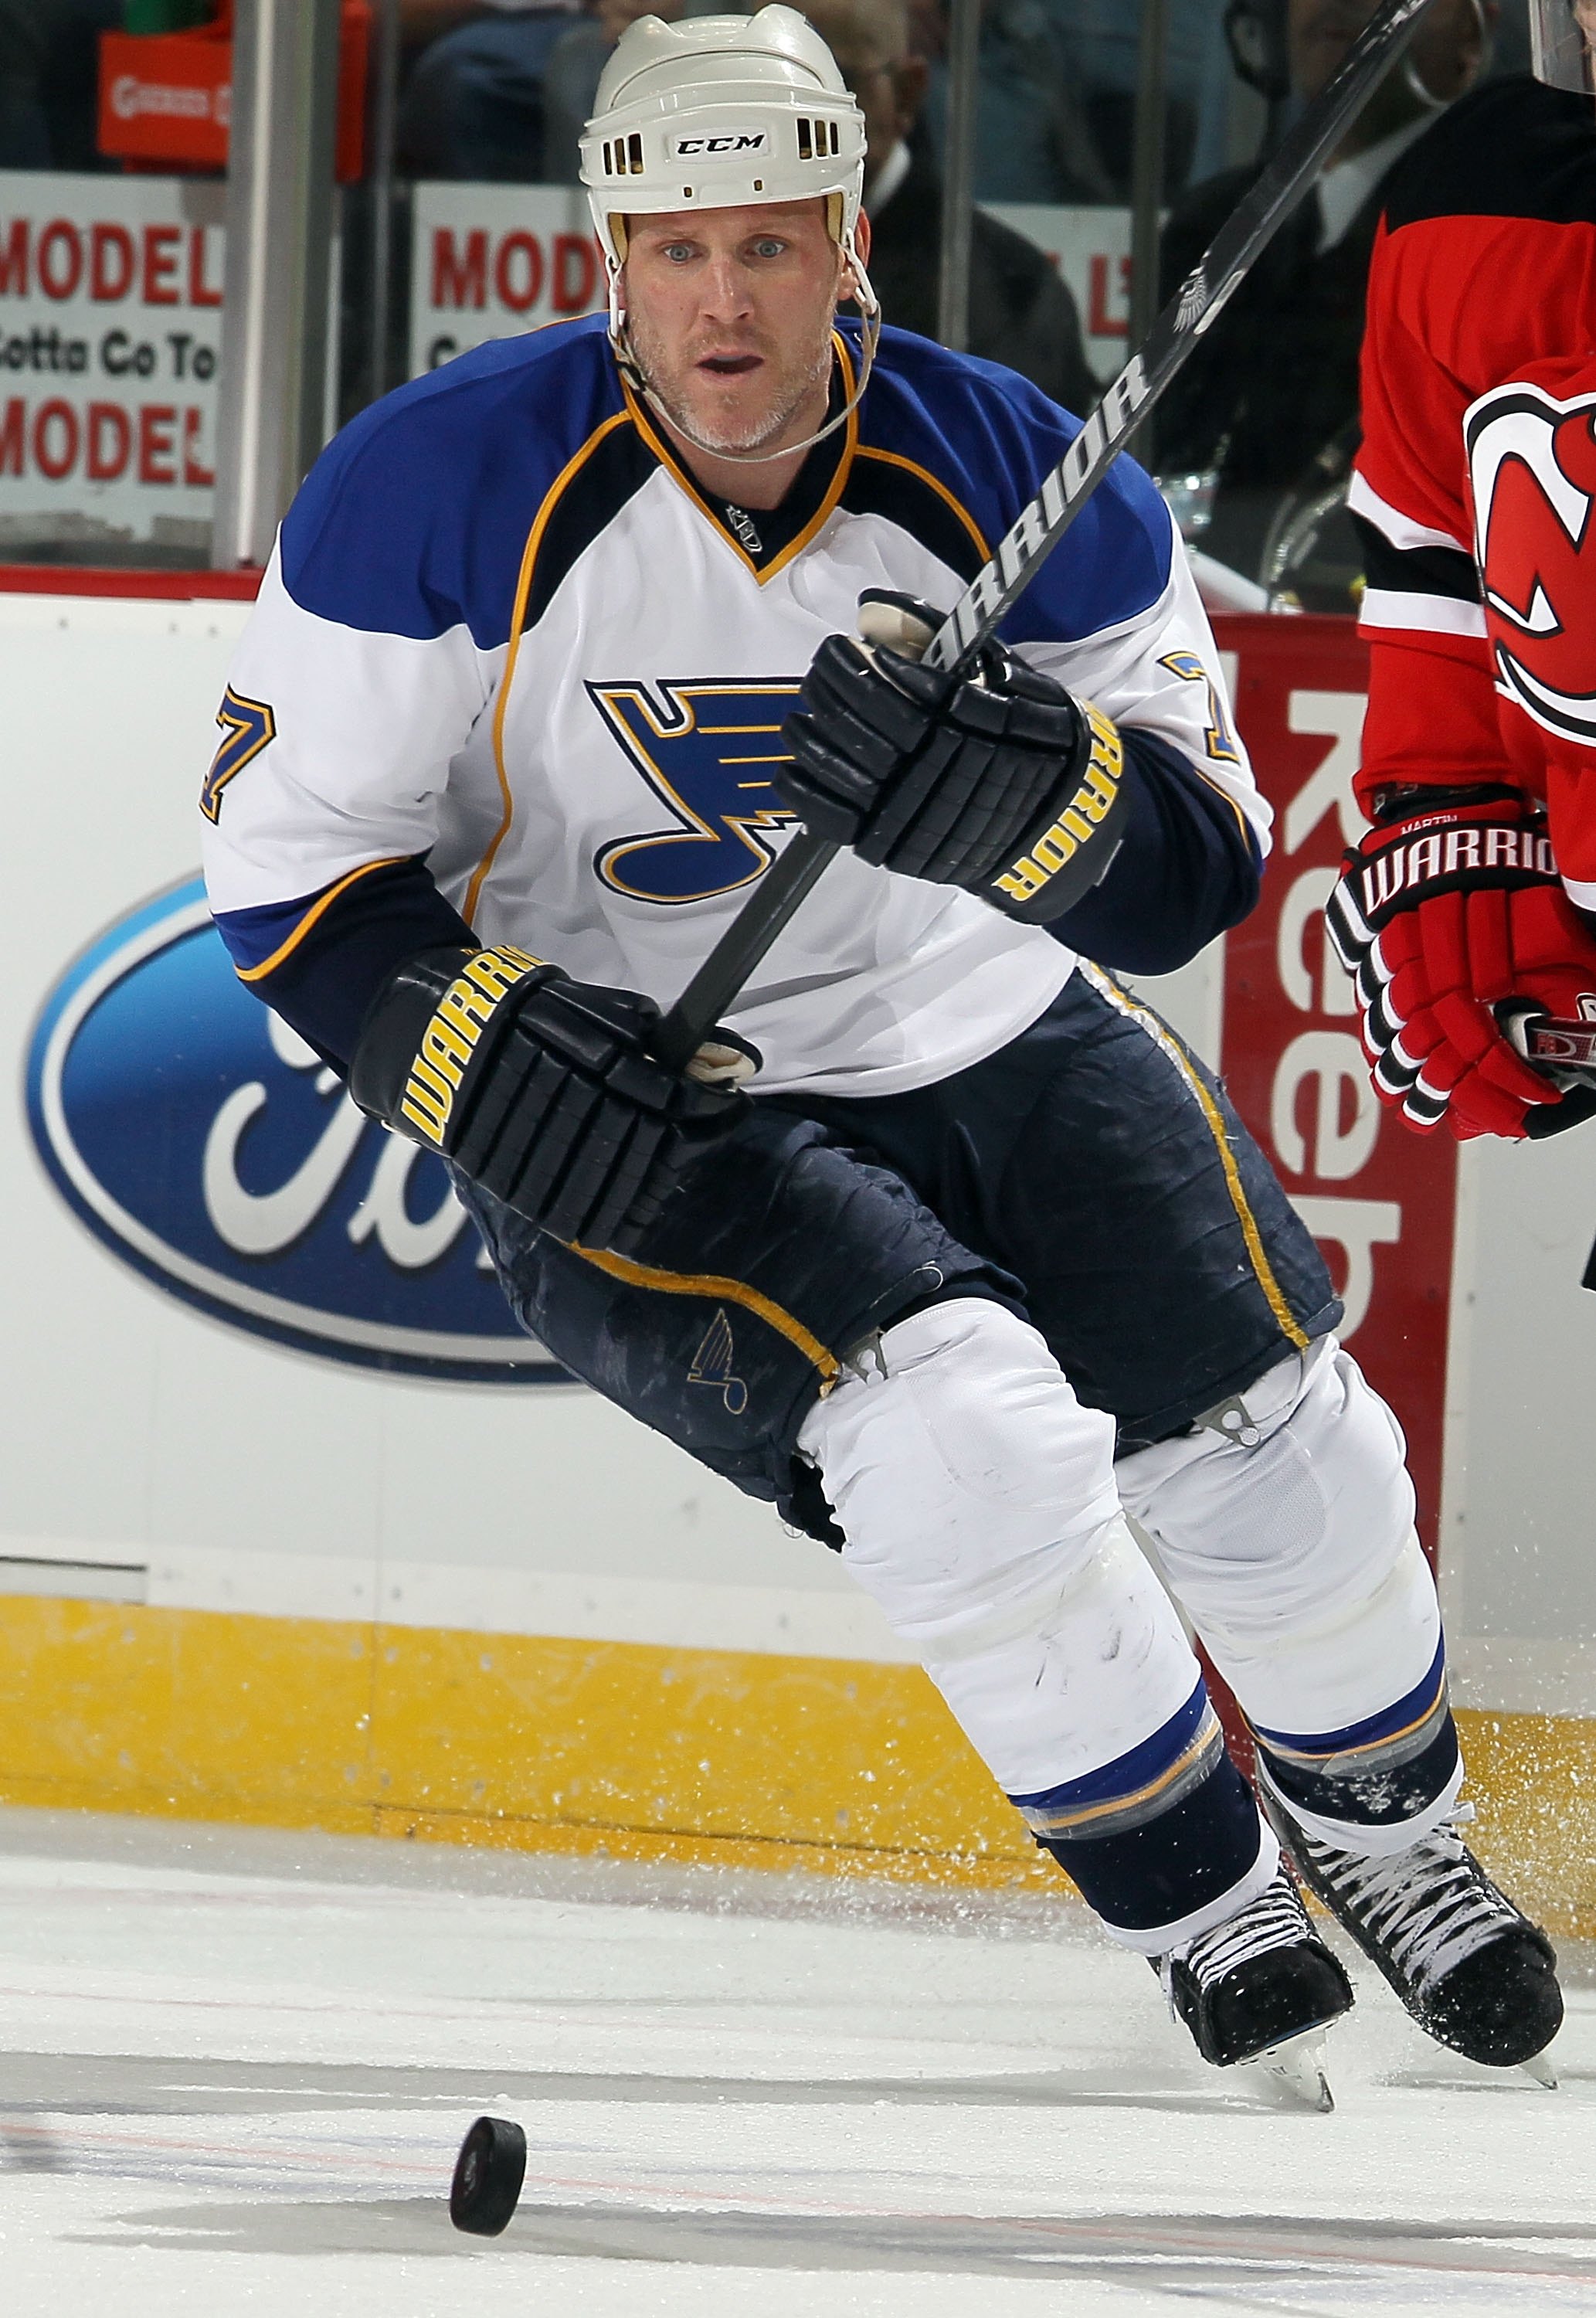 NEWARK, NJ - MARCH 20:  Keith Tkachuk #7 of the St. Louis Blues skates against the New Jersey Devils at the Prudential Center on March 20, 2010 in Newark, New Jersey. The Blues defeated the Devils 1-0.  (Photo by Jim McIsaac/Getty Images)